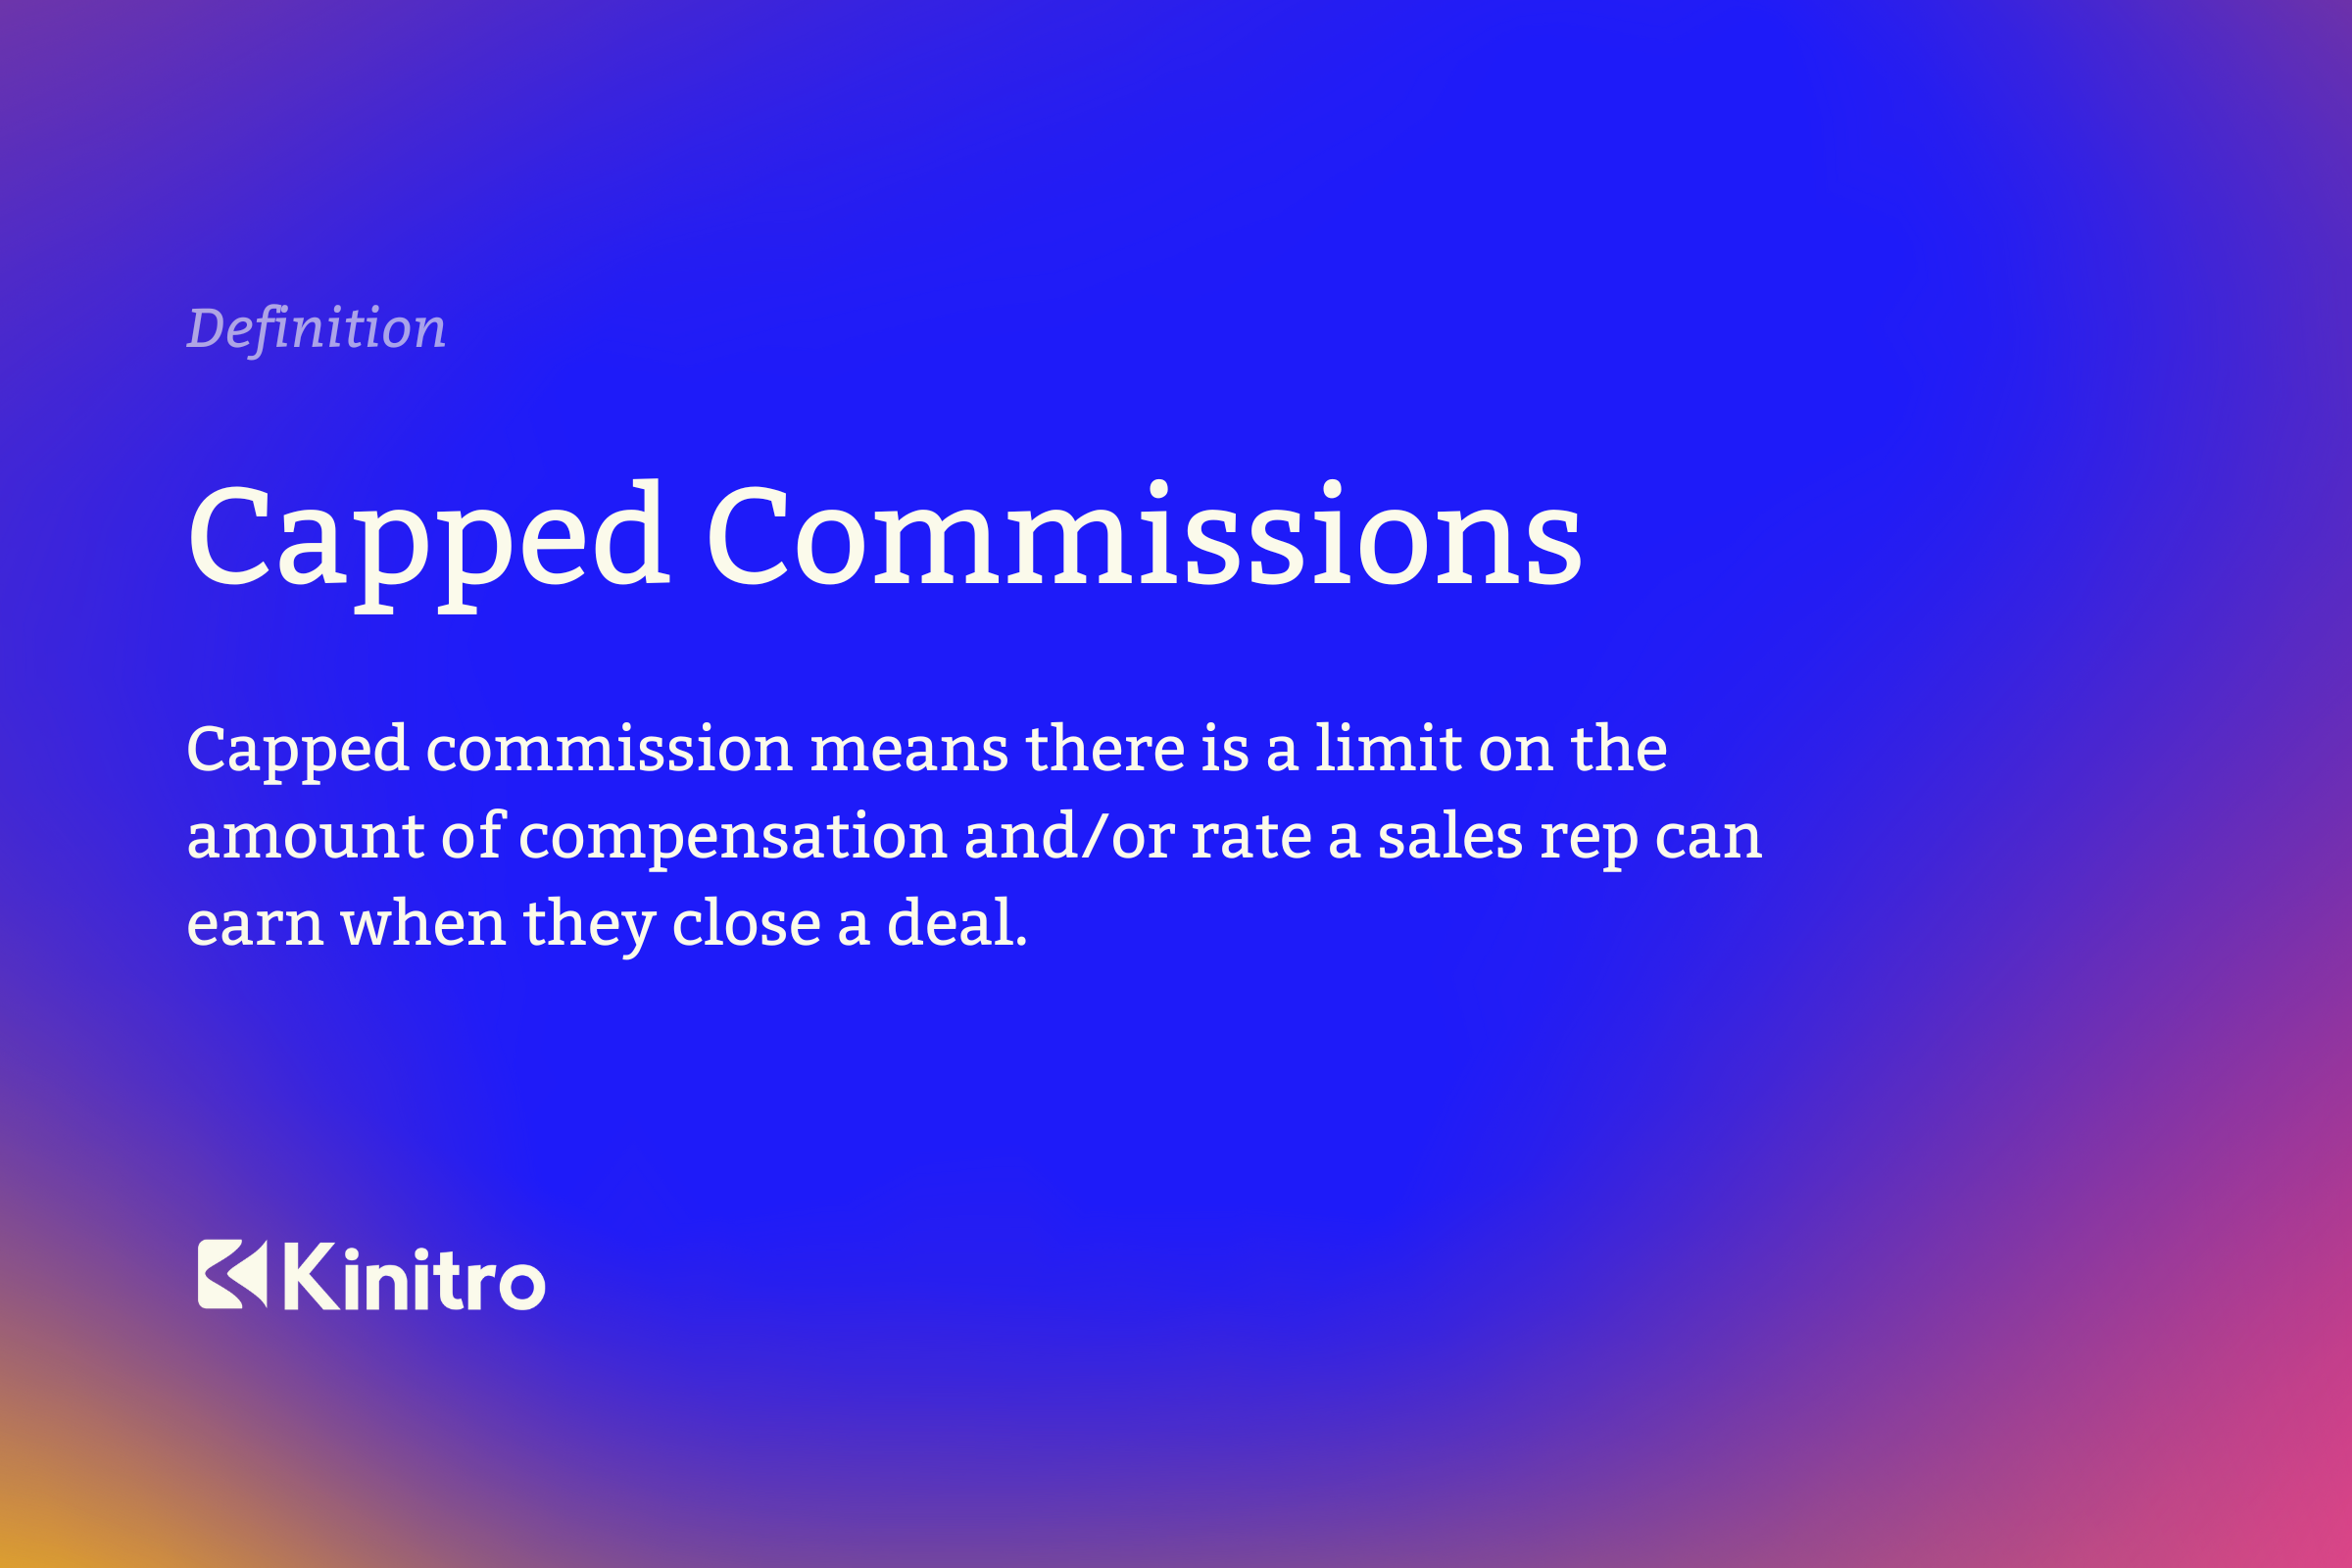 Capped Commissions Definition